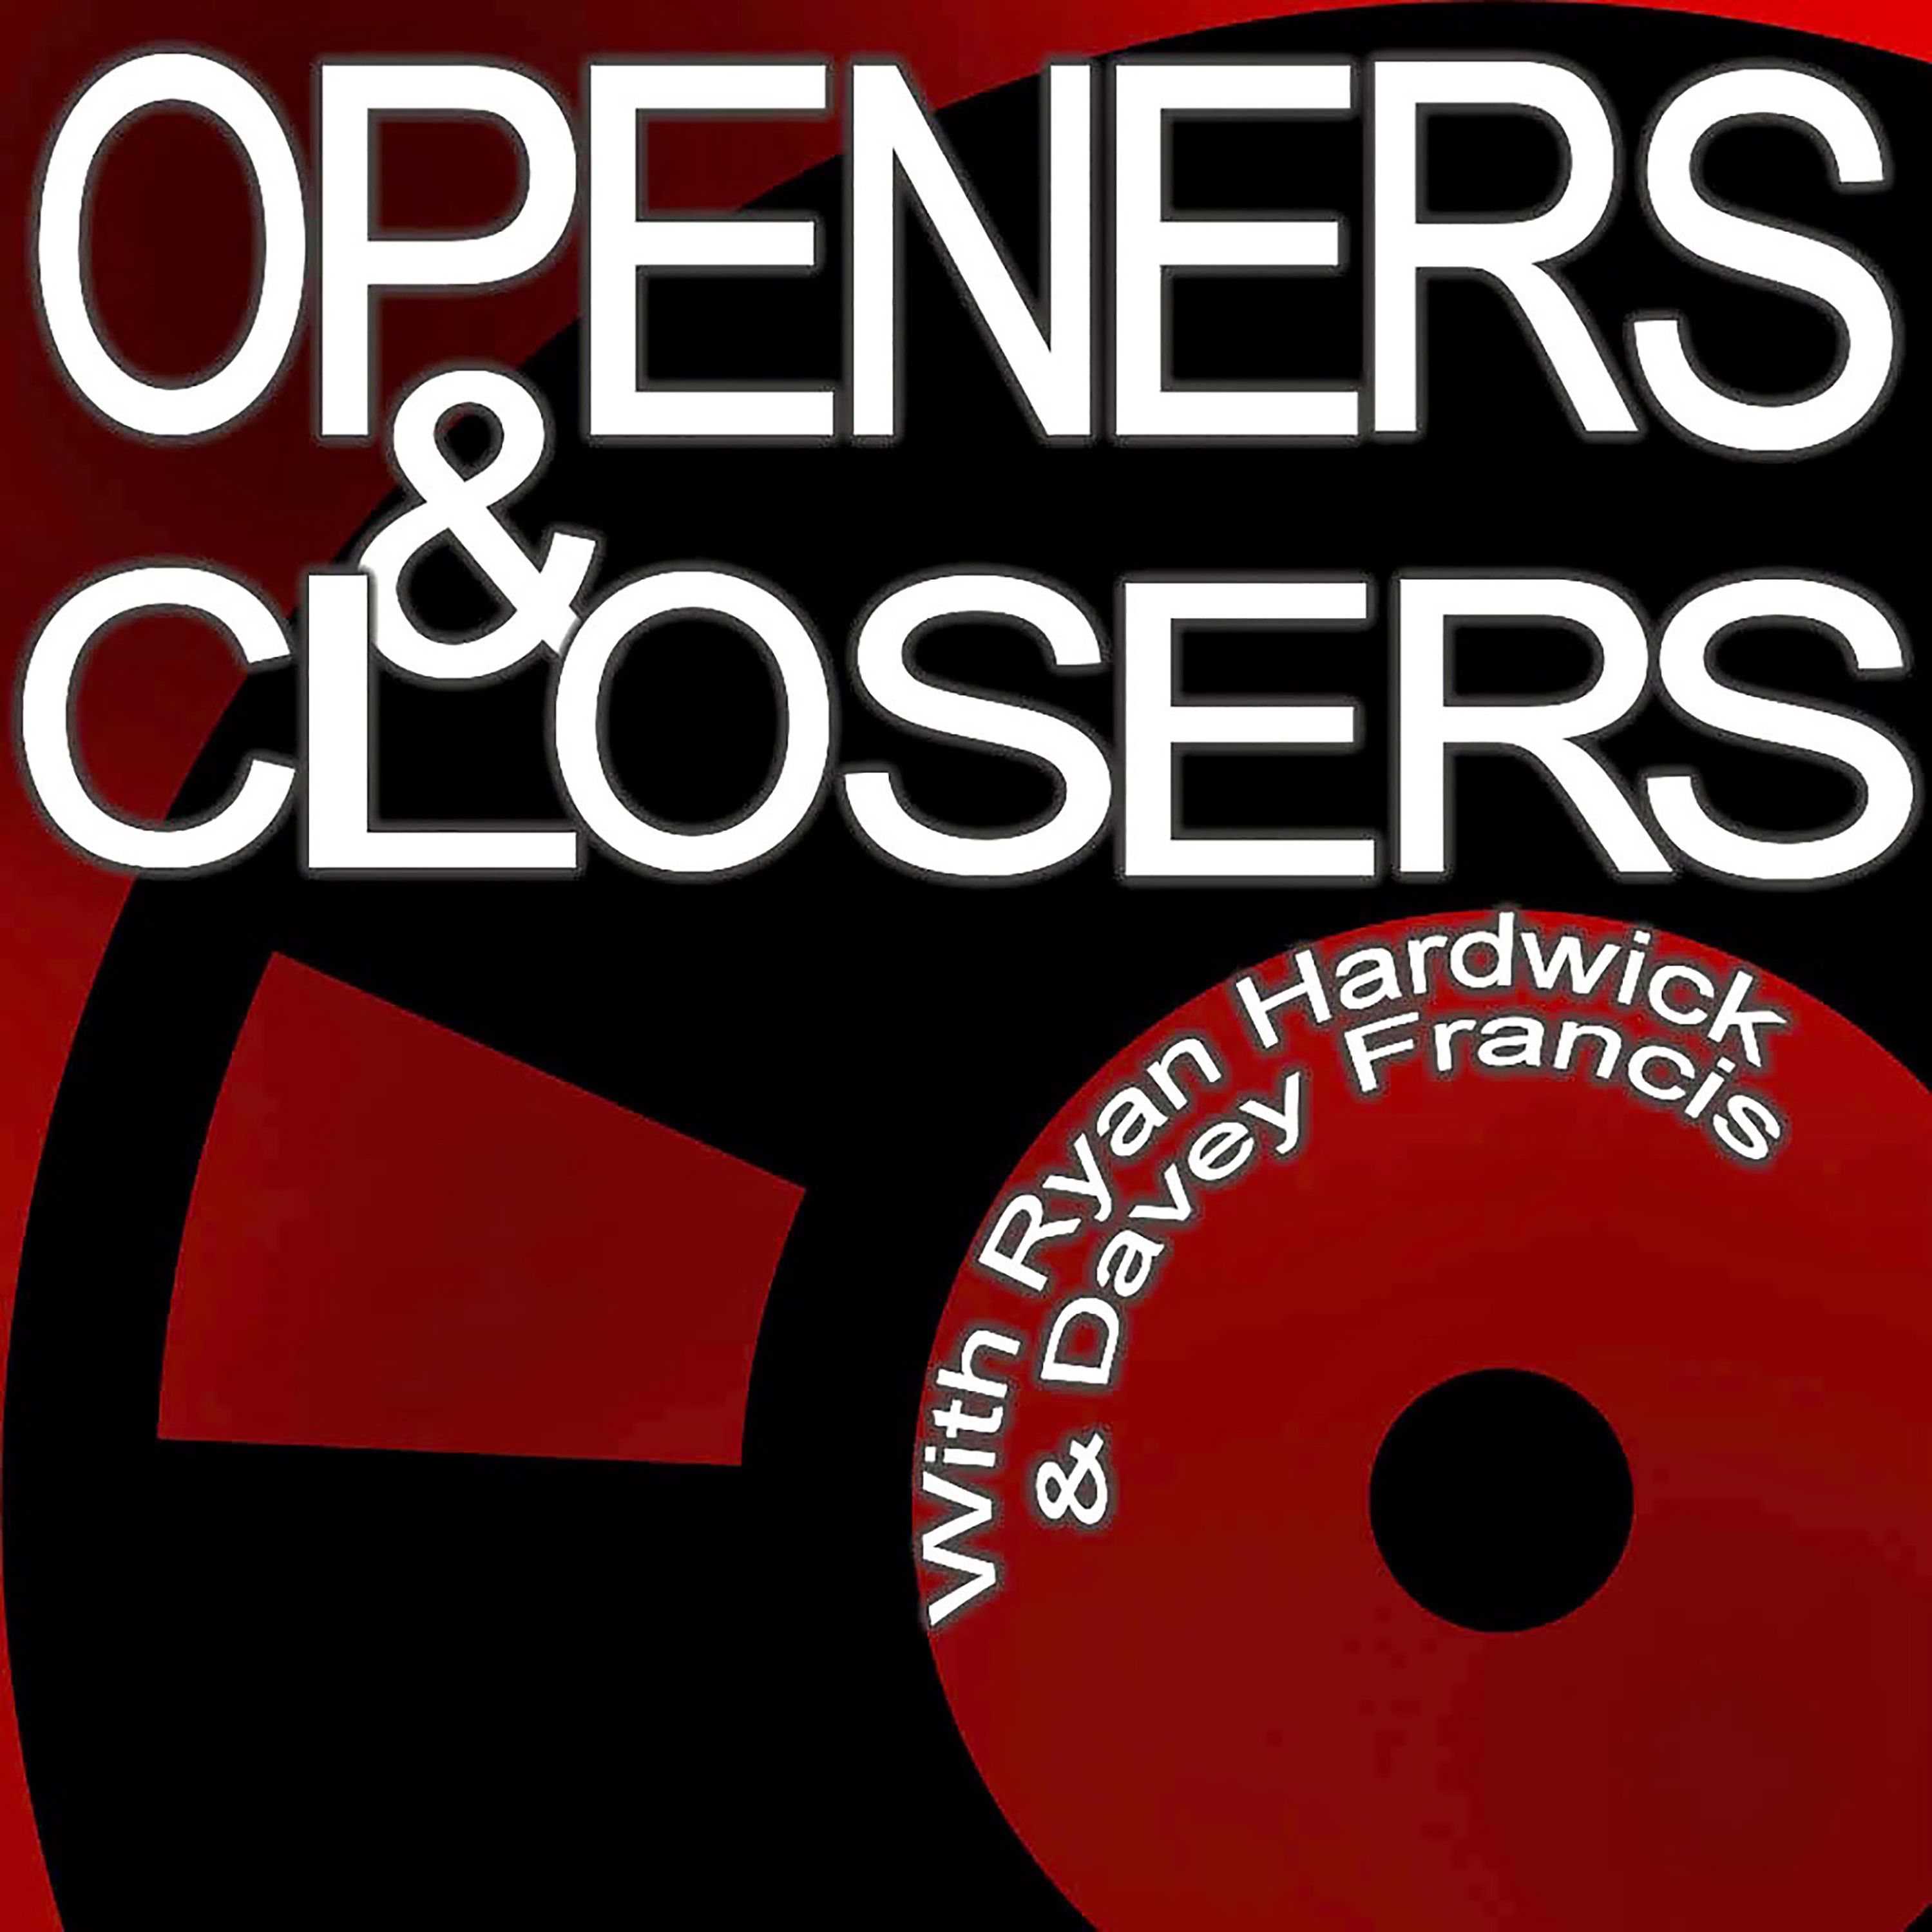 Openers & Closers